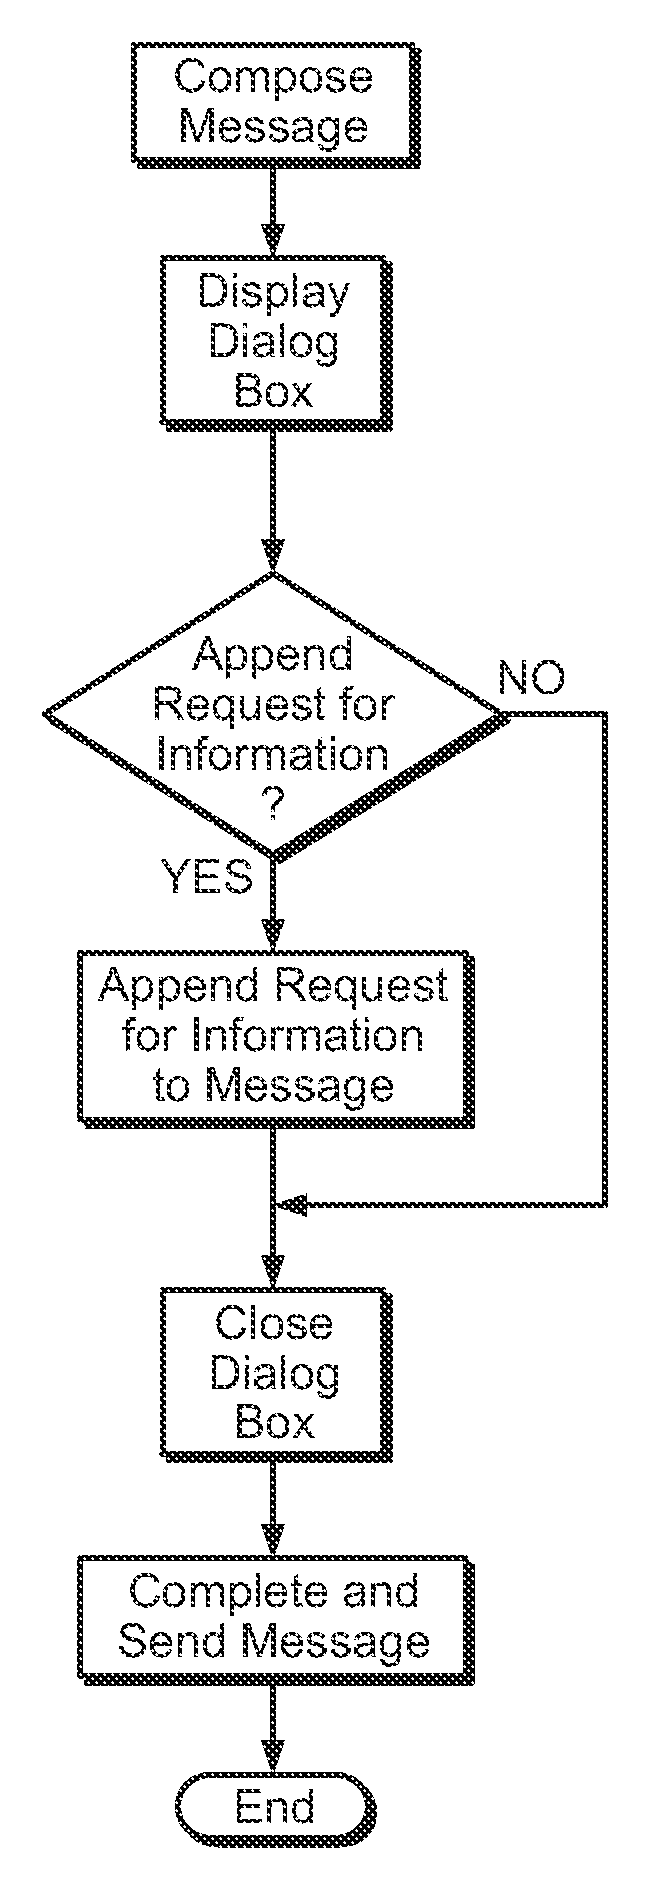 System and method for automatic opportunistic data and image sharing